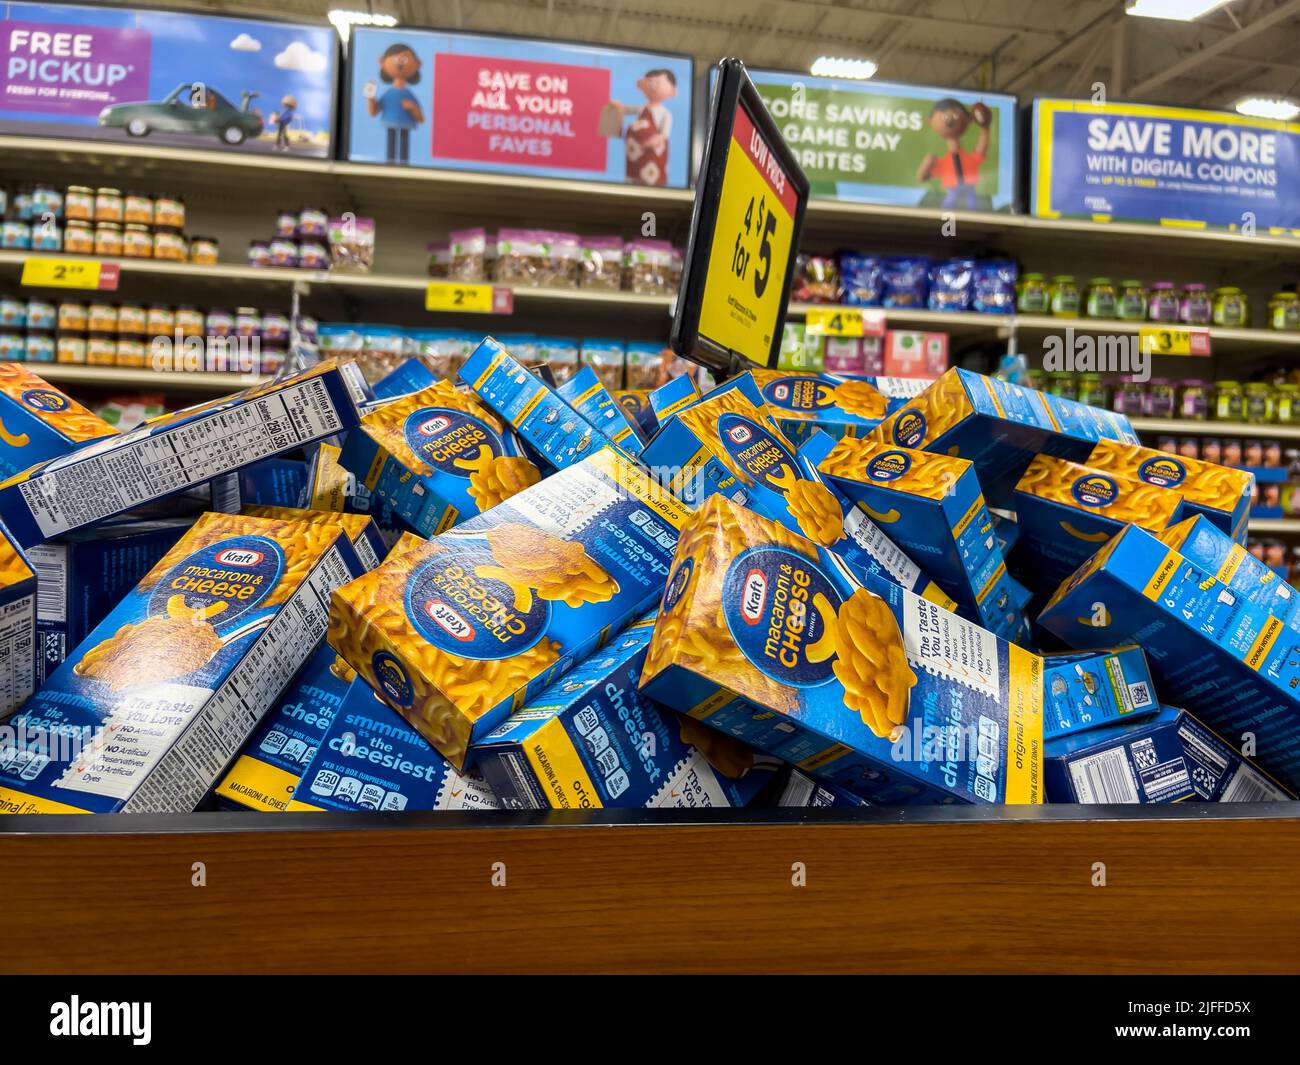 Everett, WA USA - circa June 2022: A large bin filled with Kraft macaroni and cheese boxes inside a Fred Meyer grocery store. Stock Photo